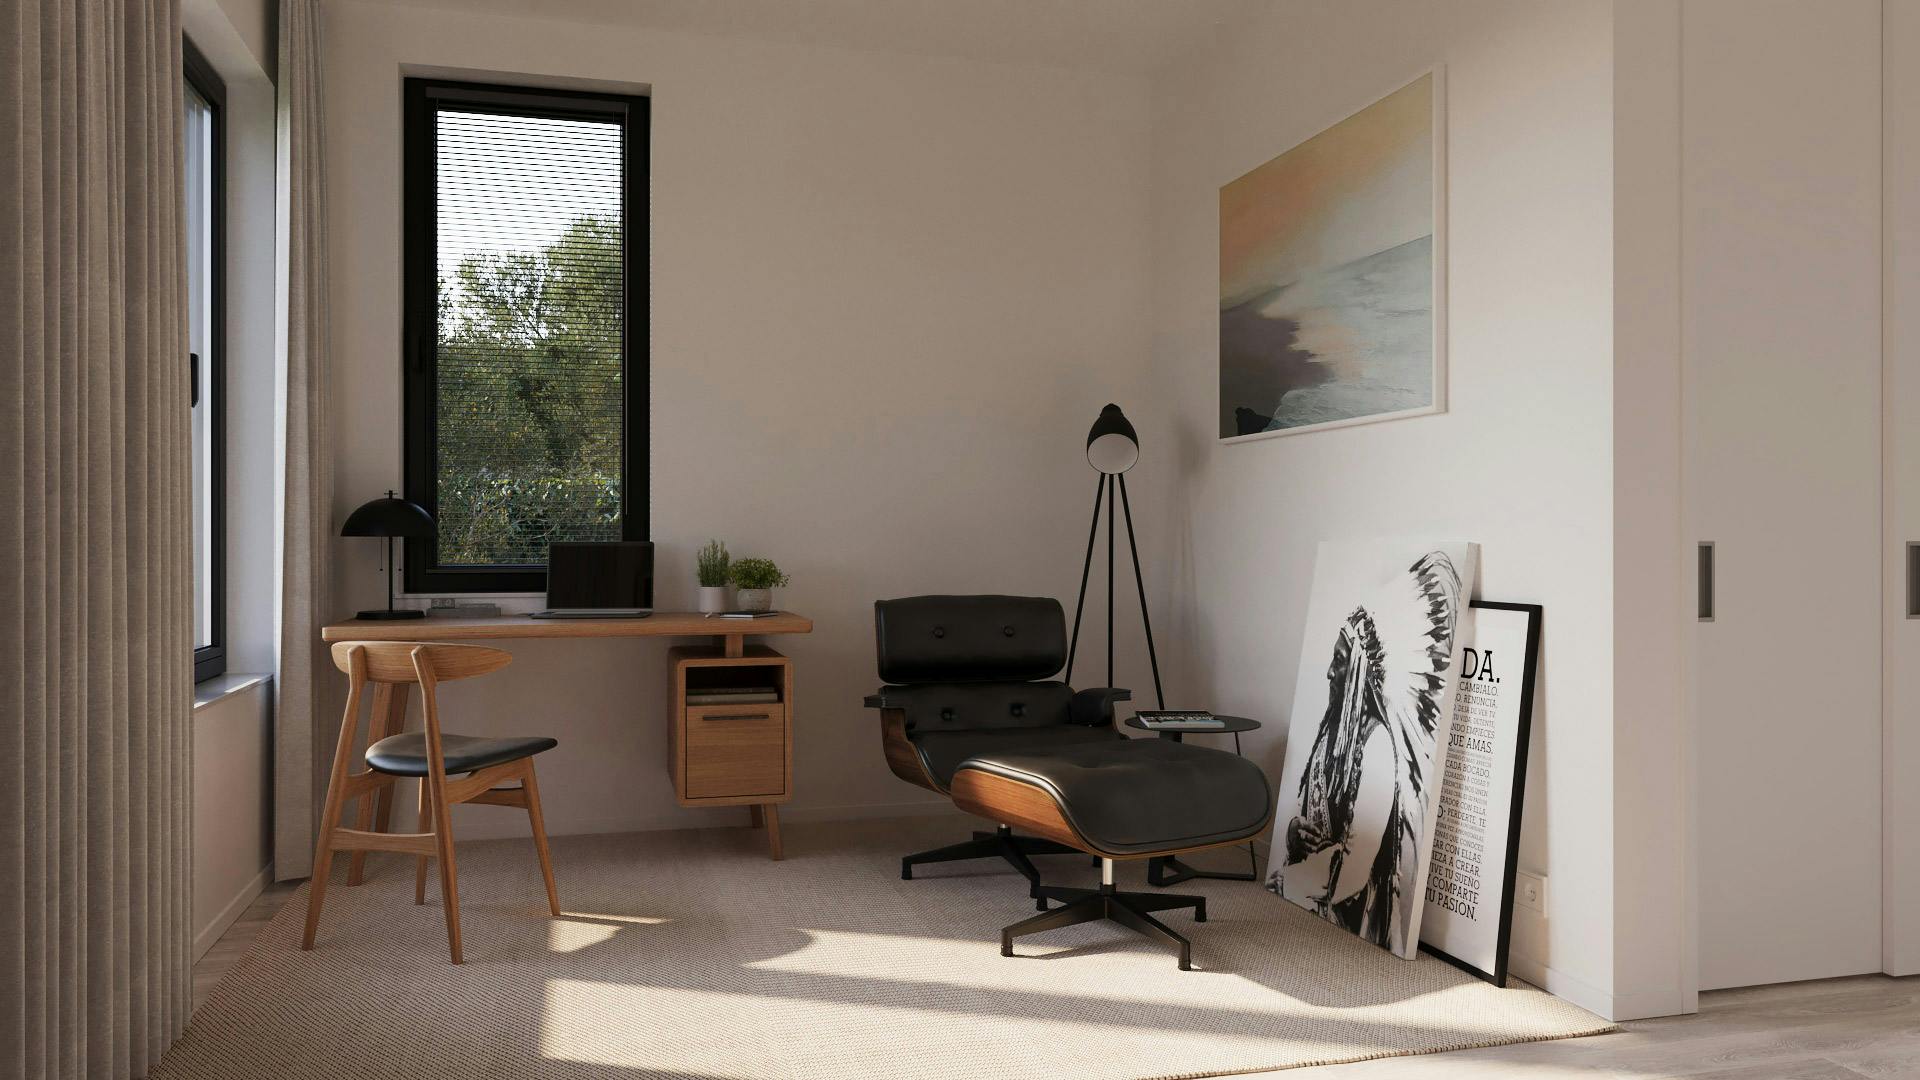 Room with office and lounge chair